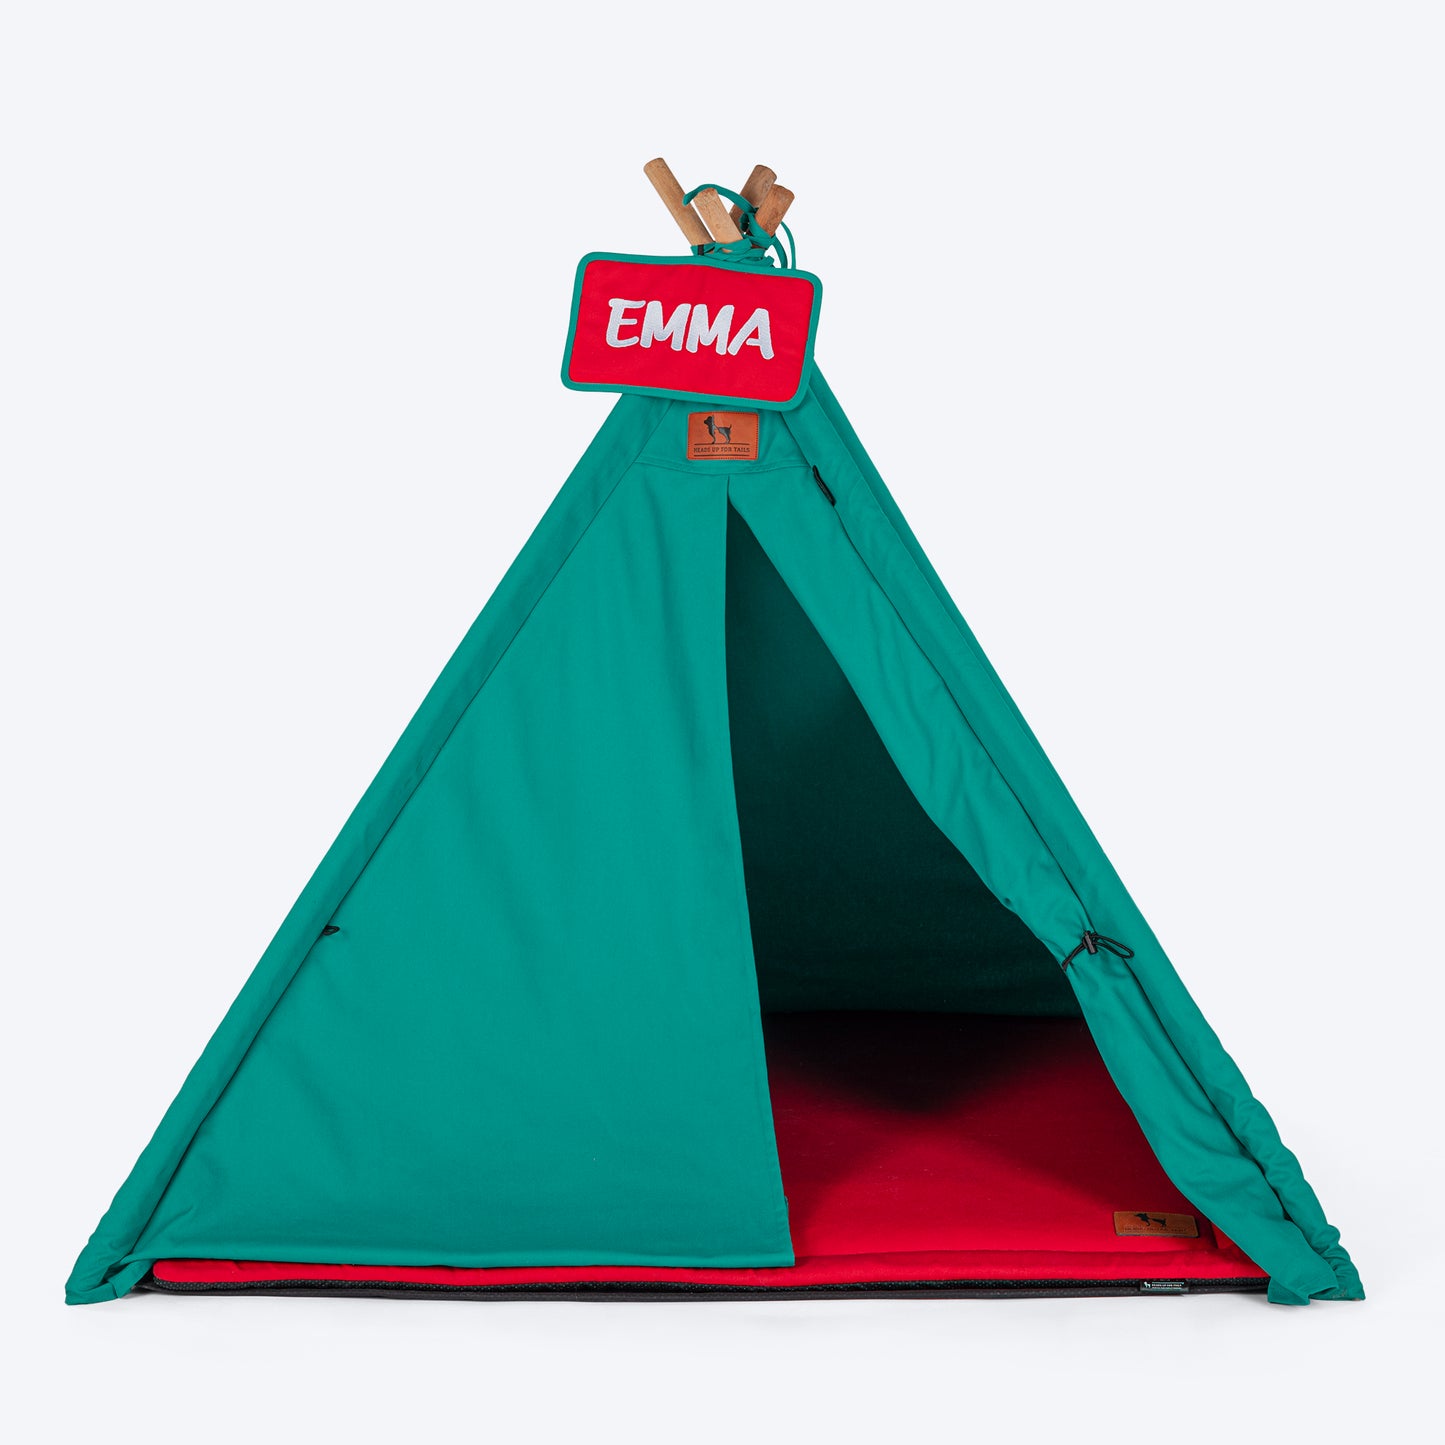 HUFT Personalised Teepee Tent For Dogs and Cats - Dynasty Green & Red - Heads Up For Tails